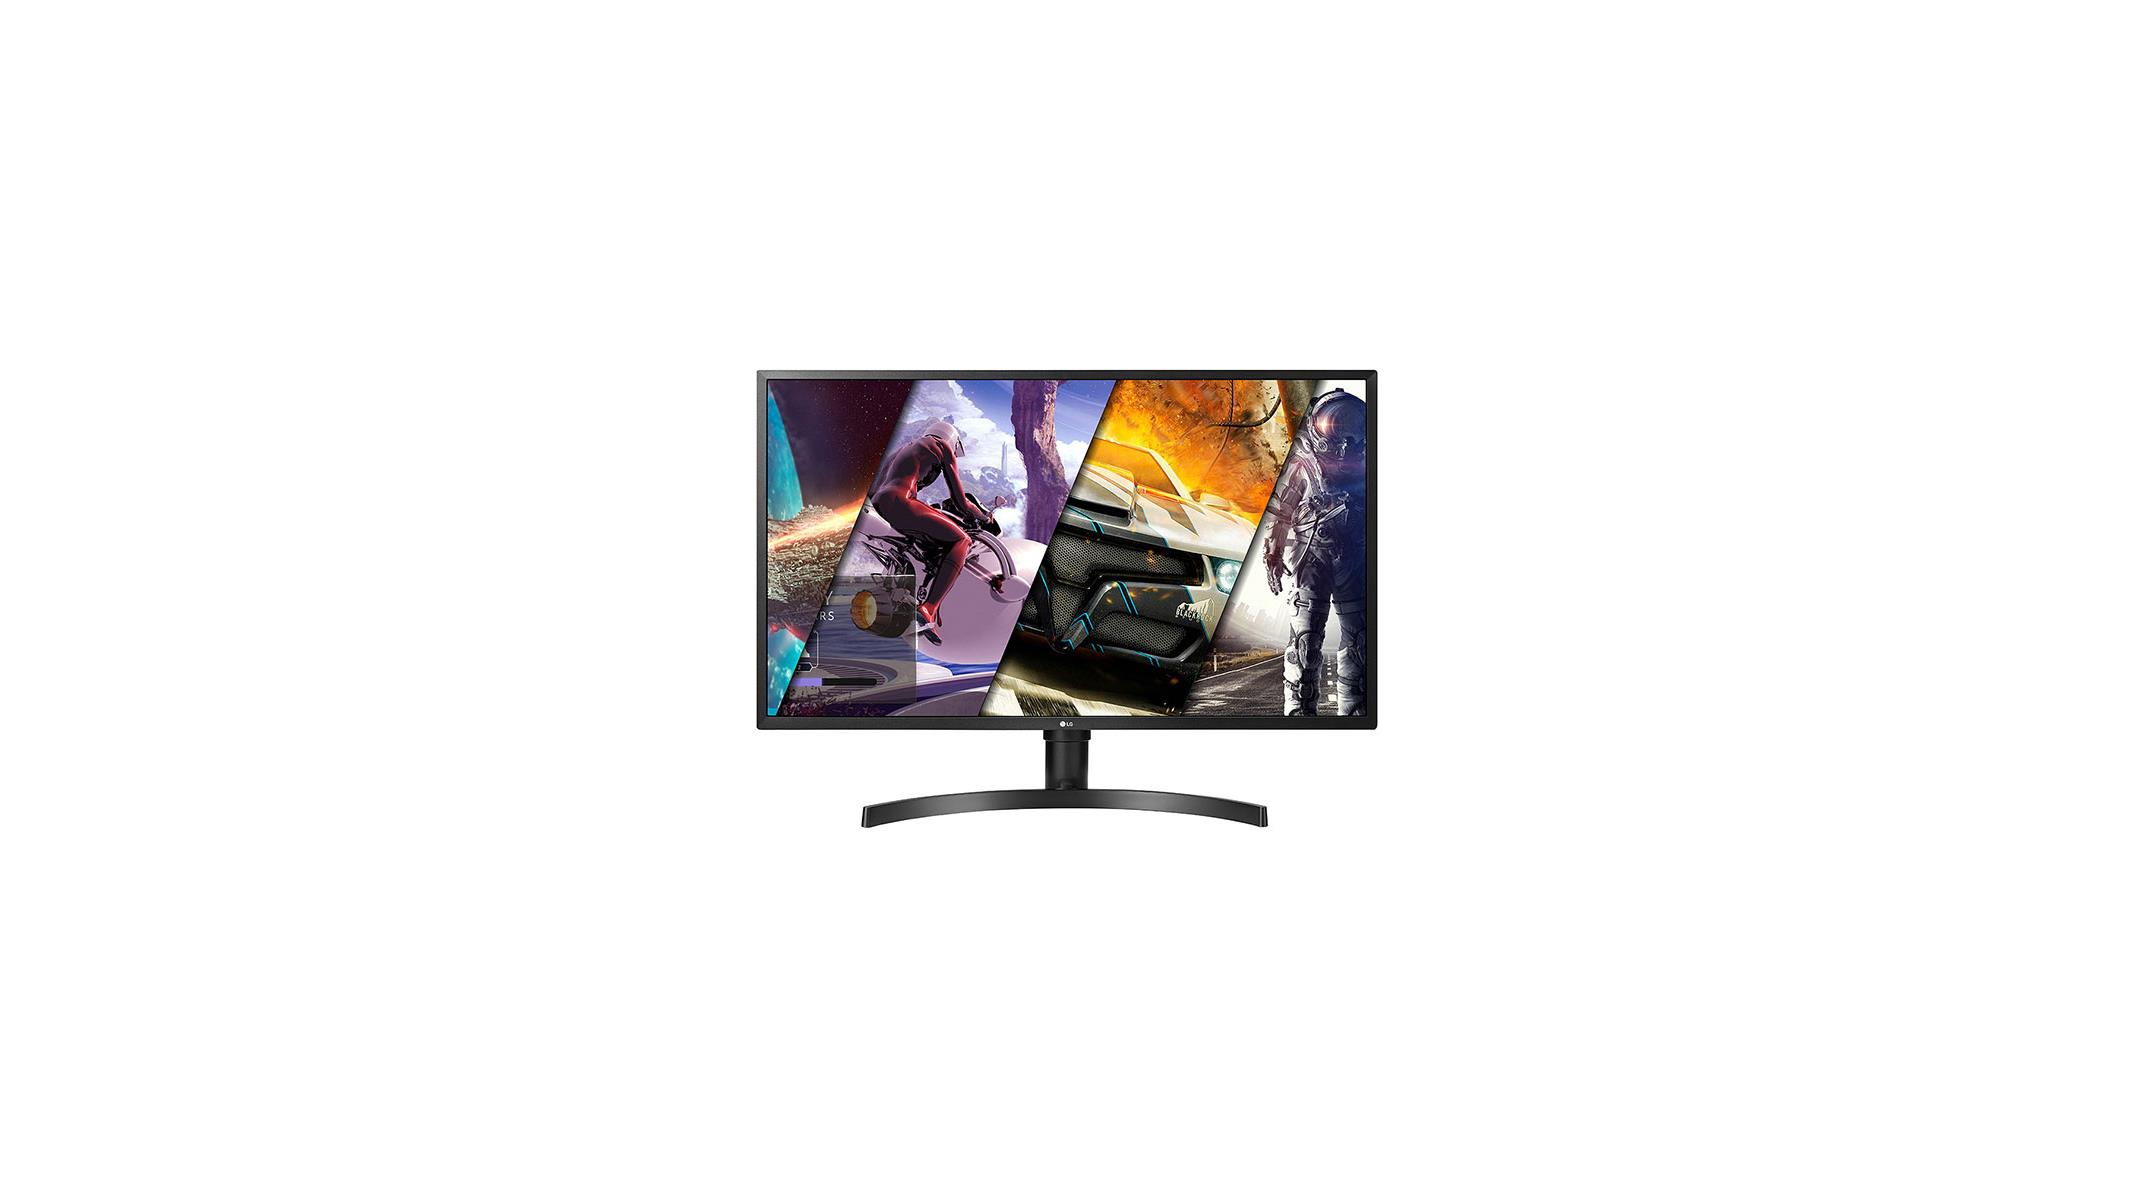 LG 32UK550-B 32-Inch AMD FreeSync Gaming Monitor Delivers 4K HDR